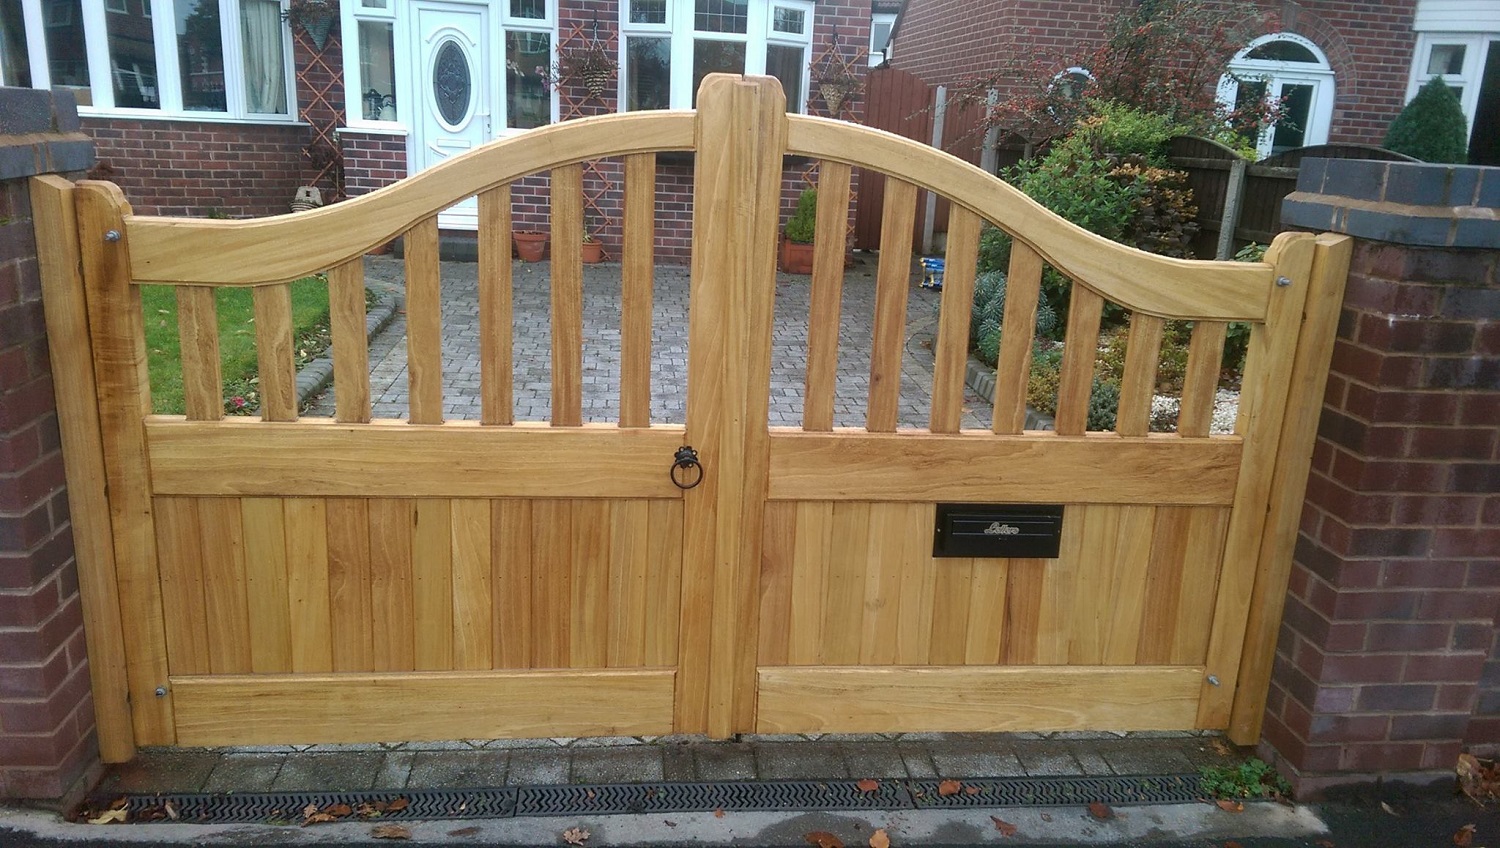 Idigbo swan neck double driveway gates with spindles and vertical boards